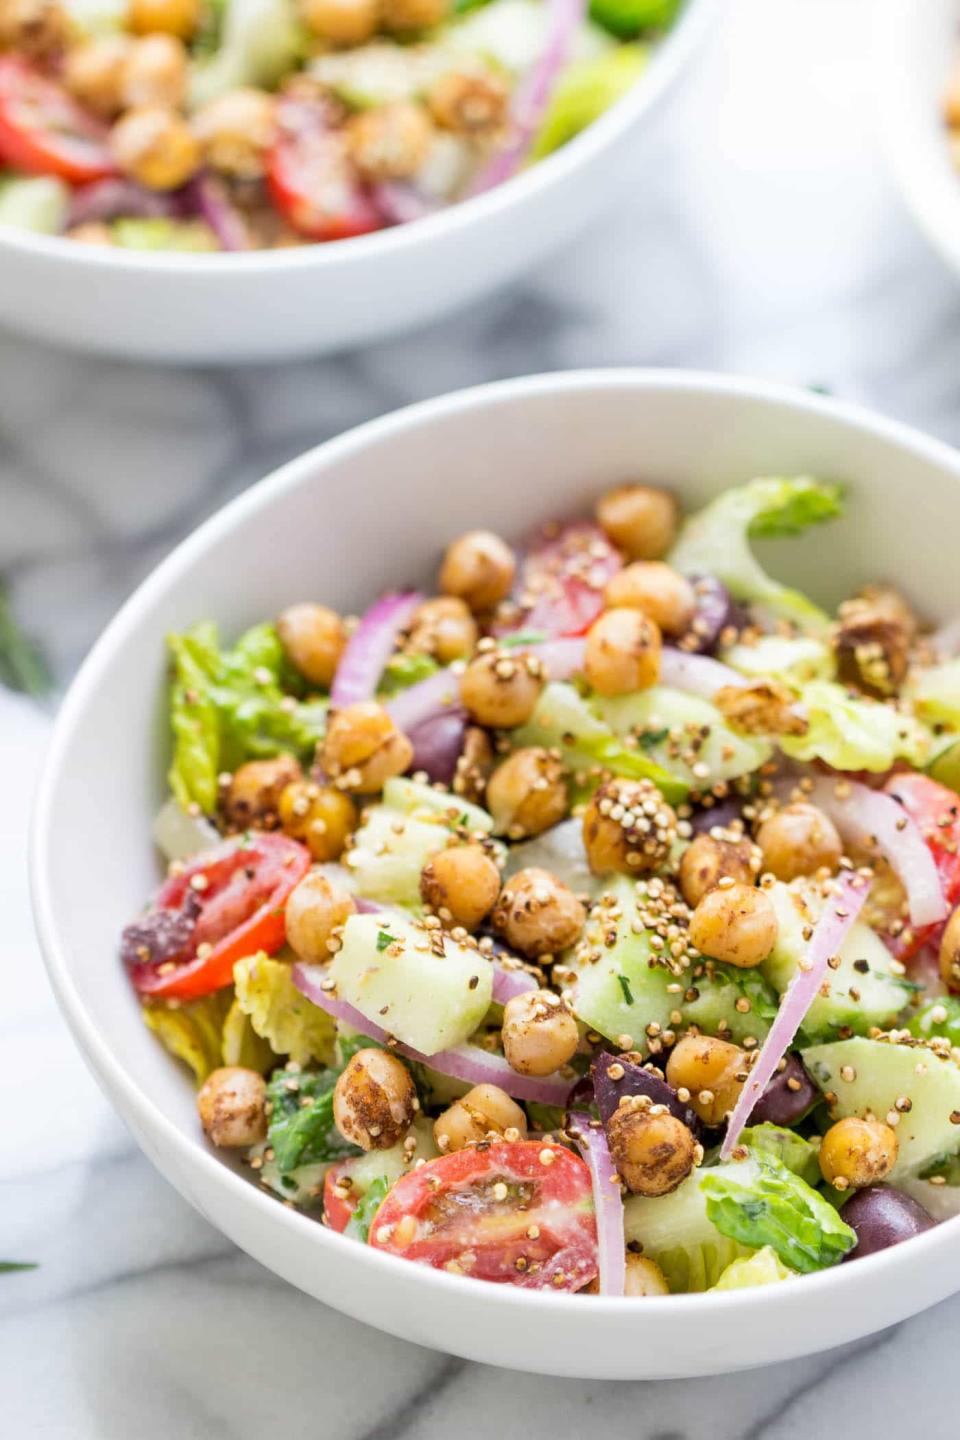 4. Vegan Chopped Salad With Spiced Chickpeas